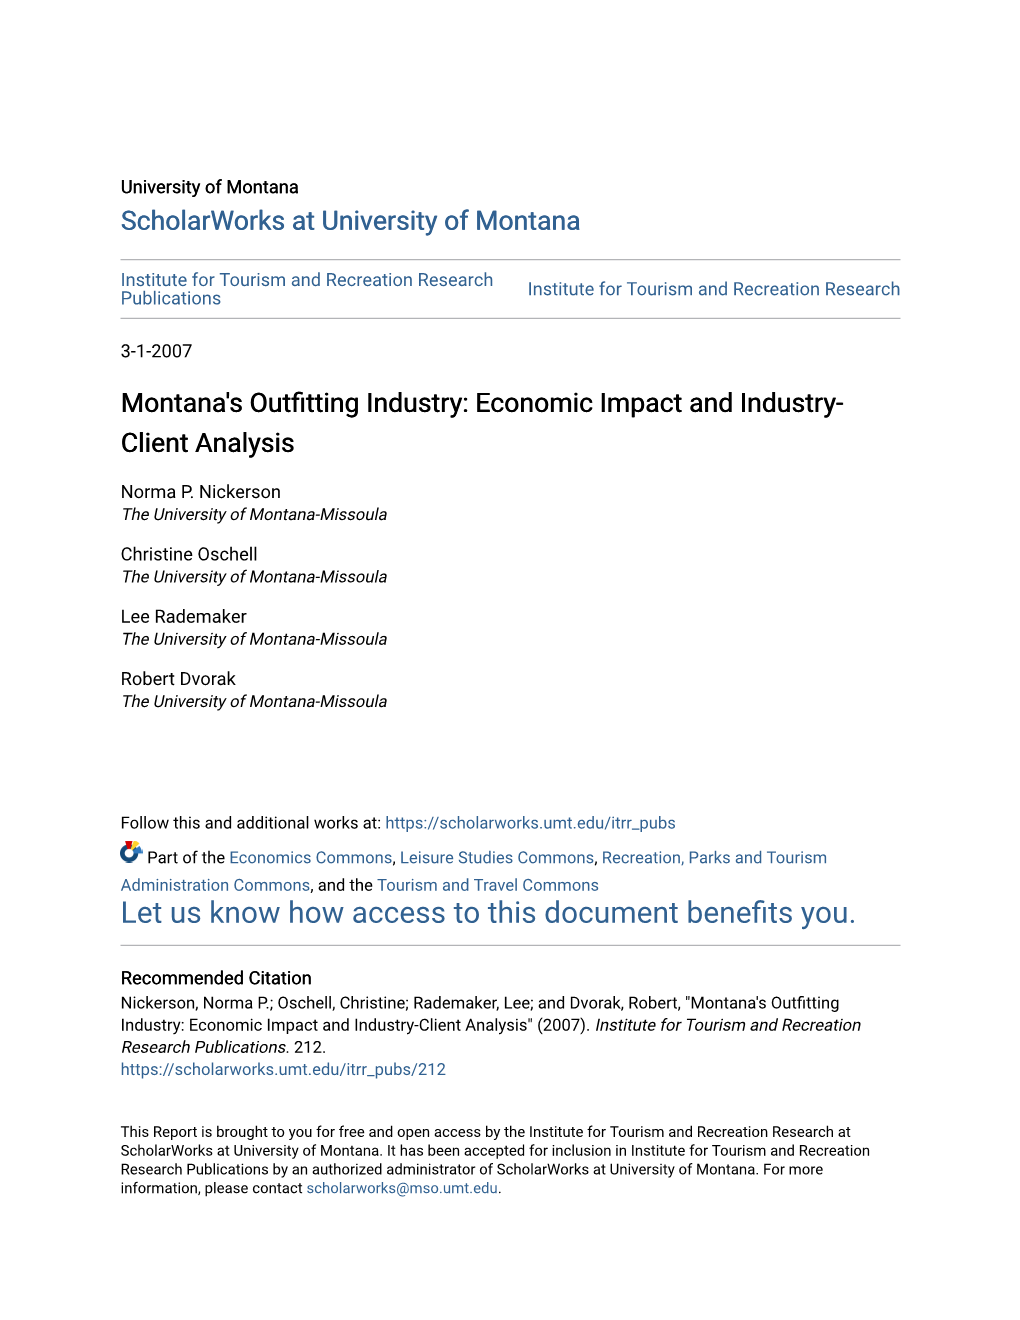 Economic Impact and Industry-Client Analysis" (2007)